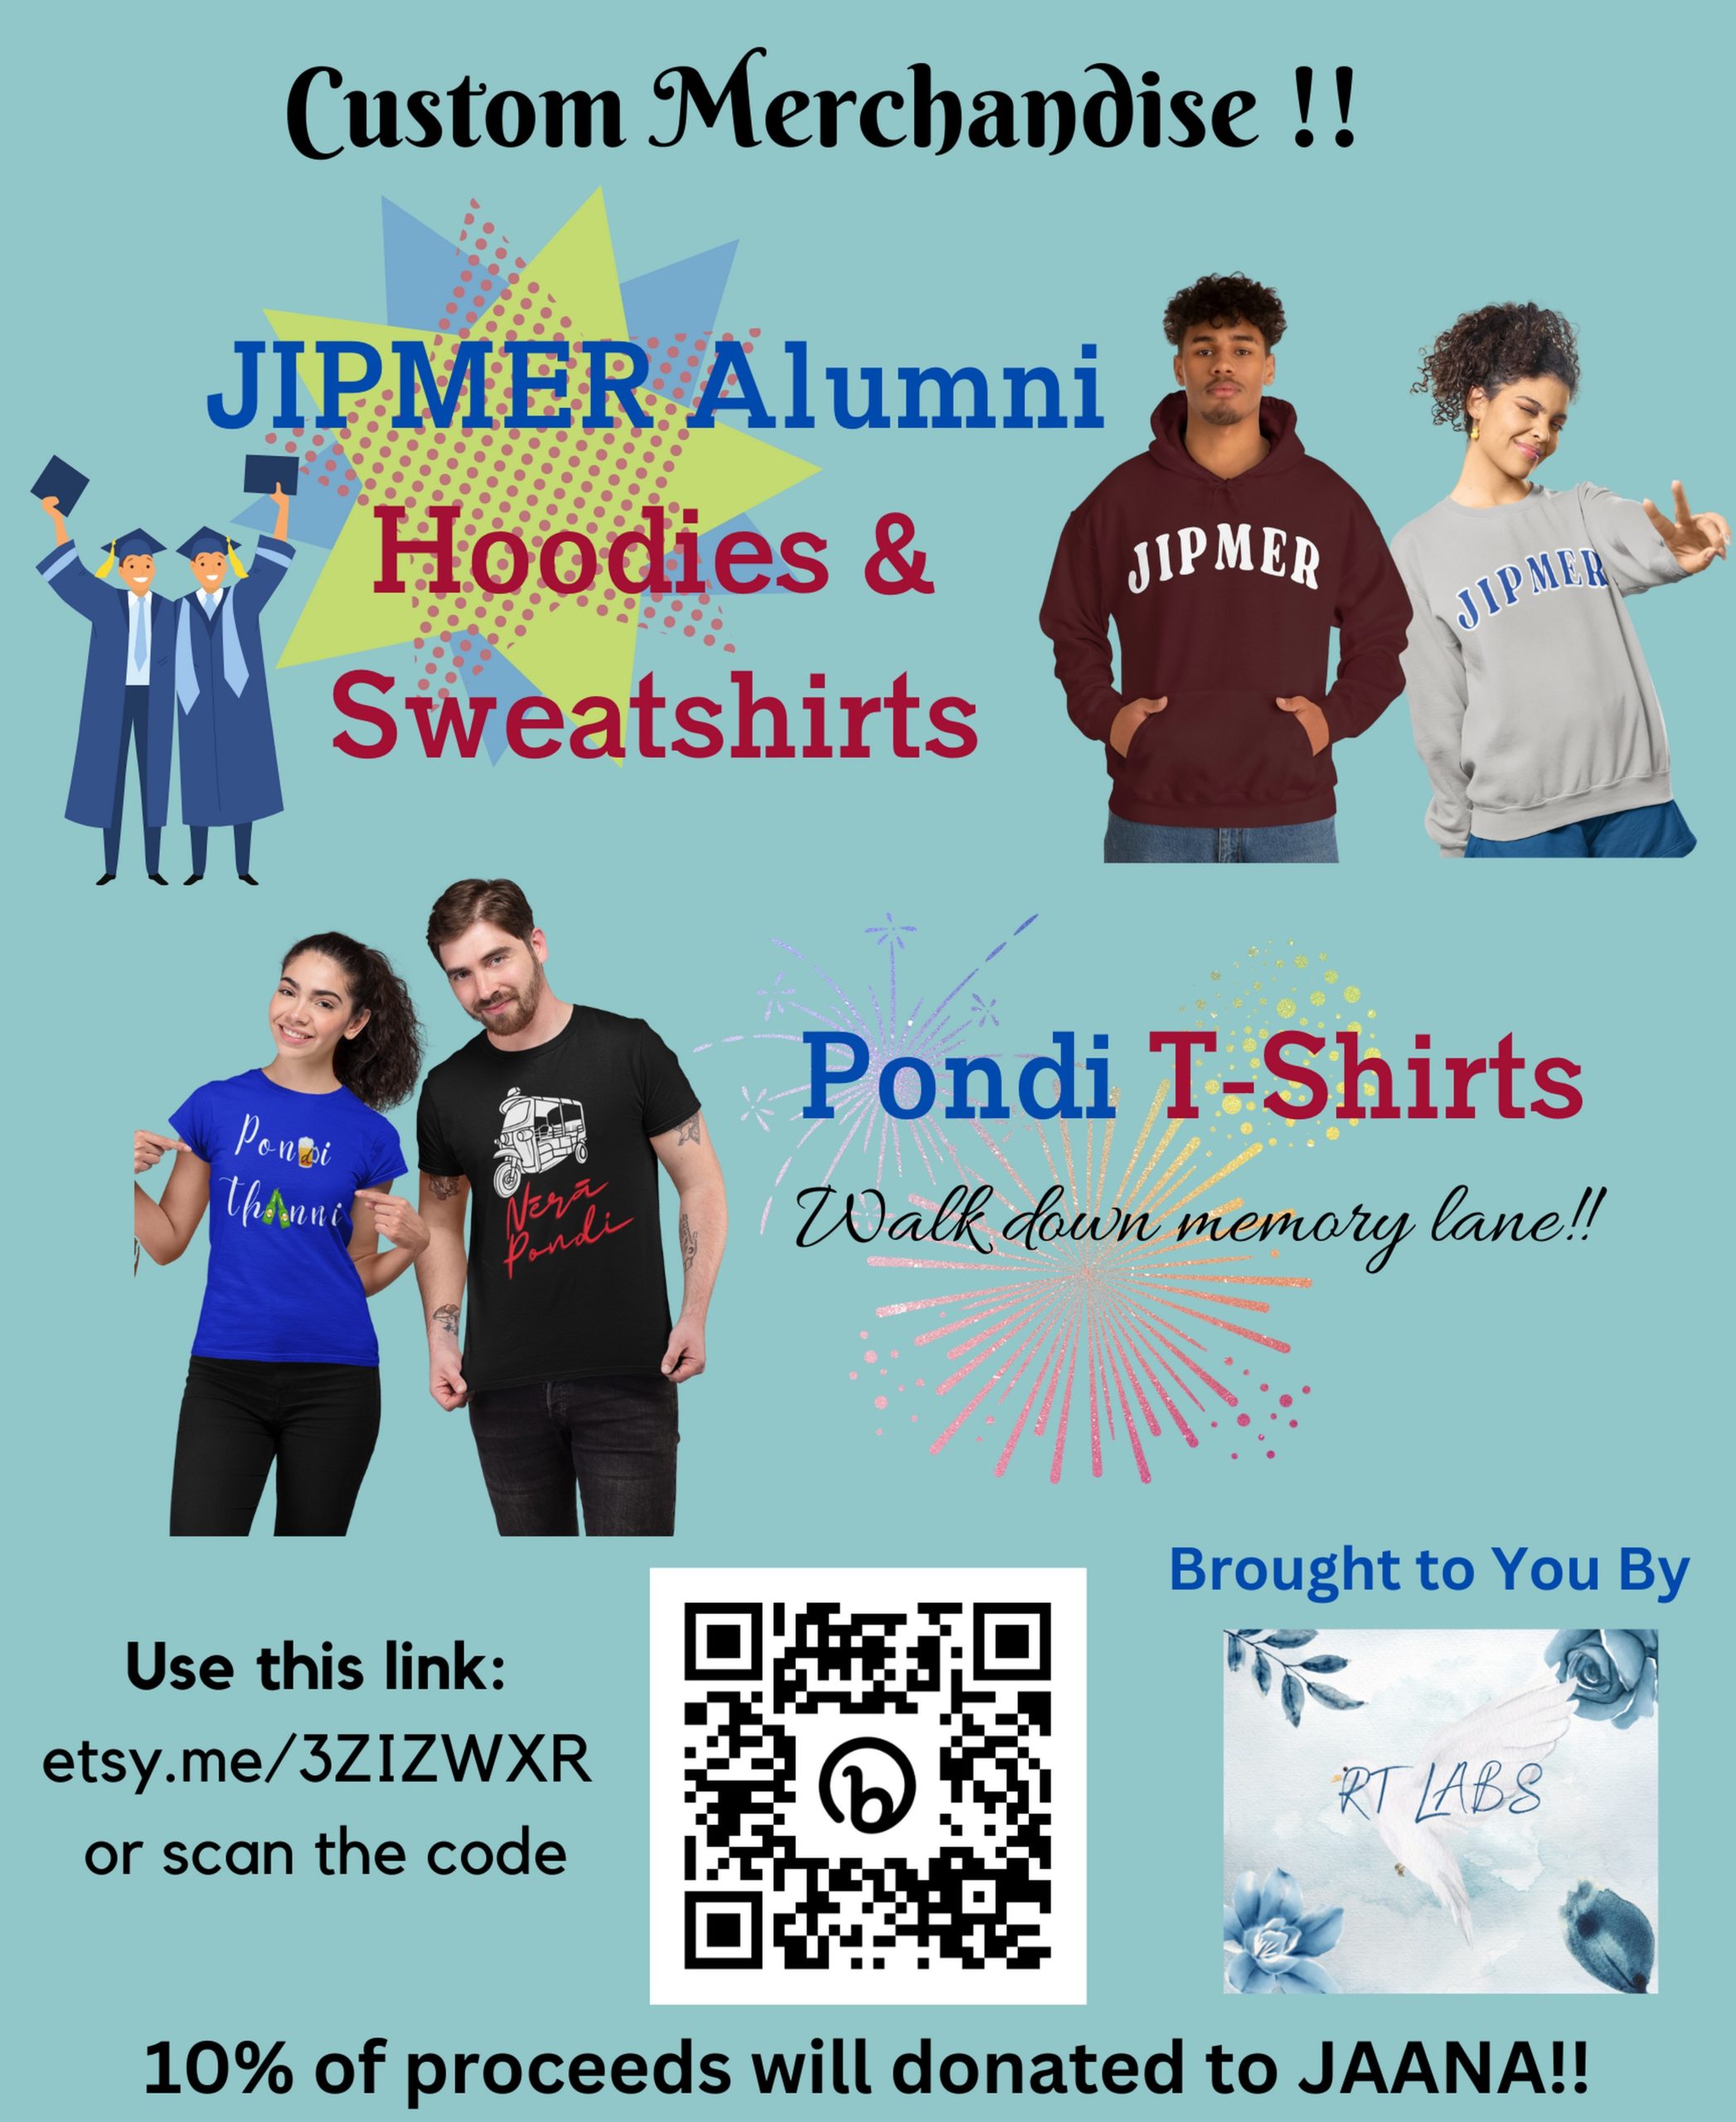 Custom Merchandise!! JIPMER Alumni Hoodies & Sweatshirts. Pondi T-Shirts. Walk down memory lane. Use this link: https://etsy.me/3ZIZWXR or scan the code. Brought to you by RT Labs. 10 percent of proceeds will be donated to JAANA